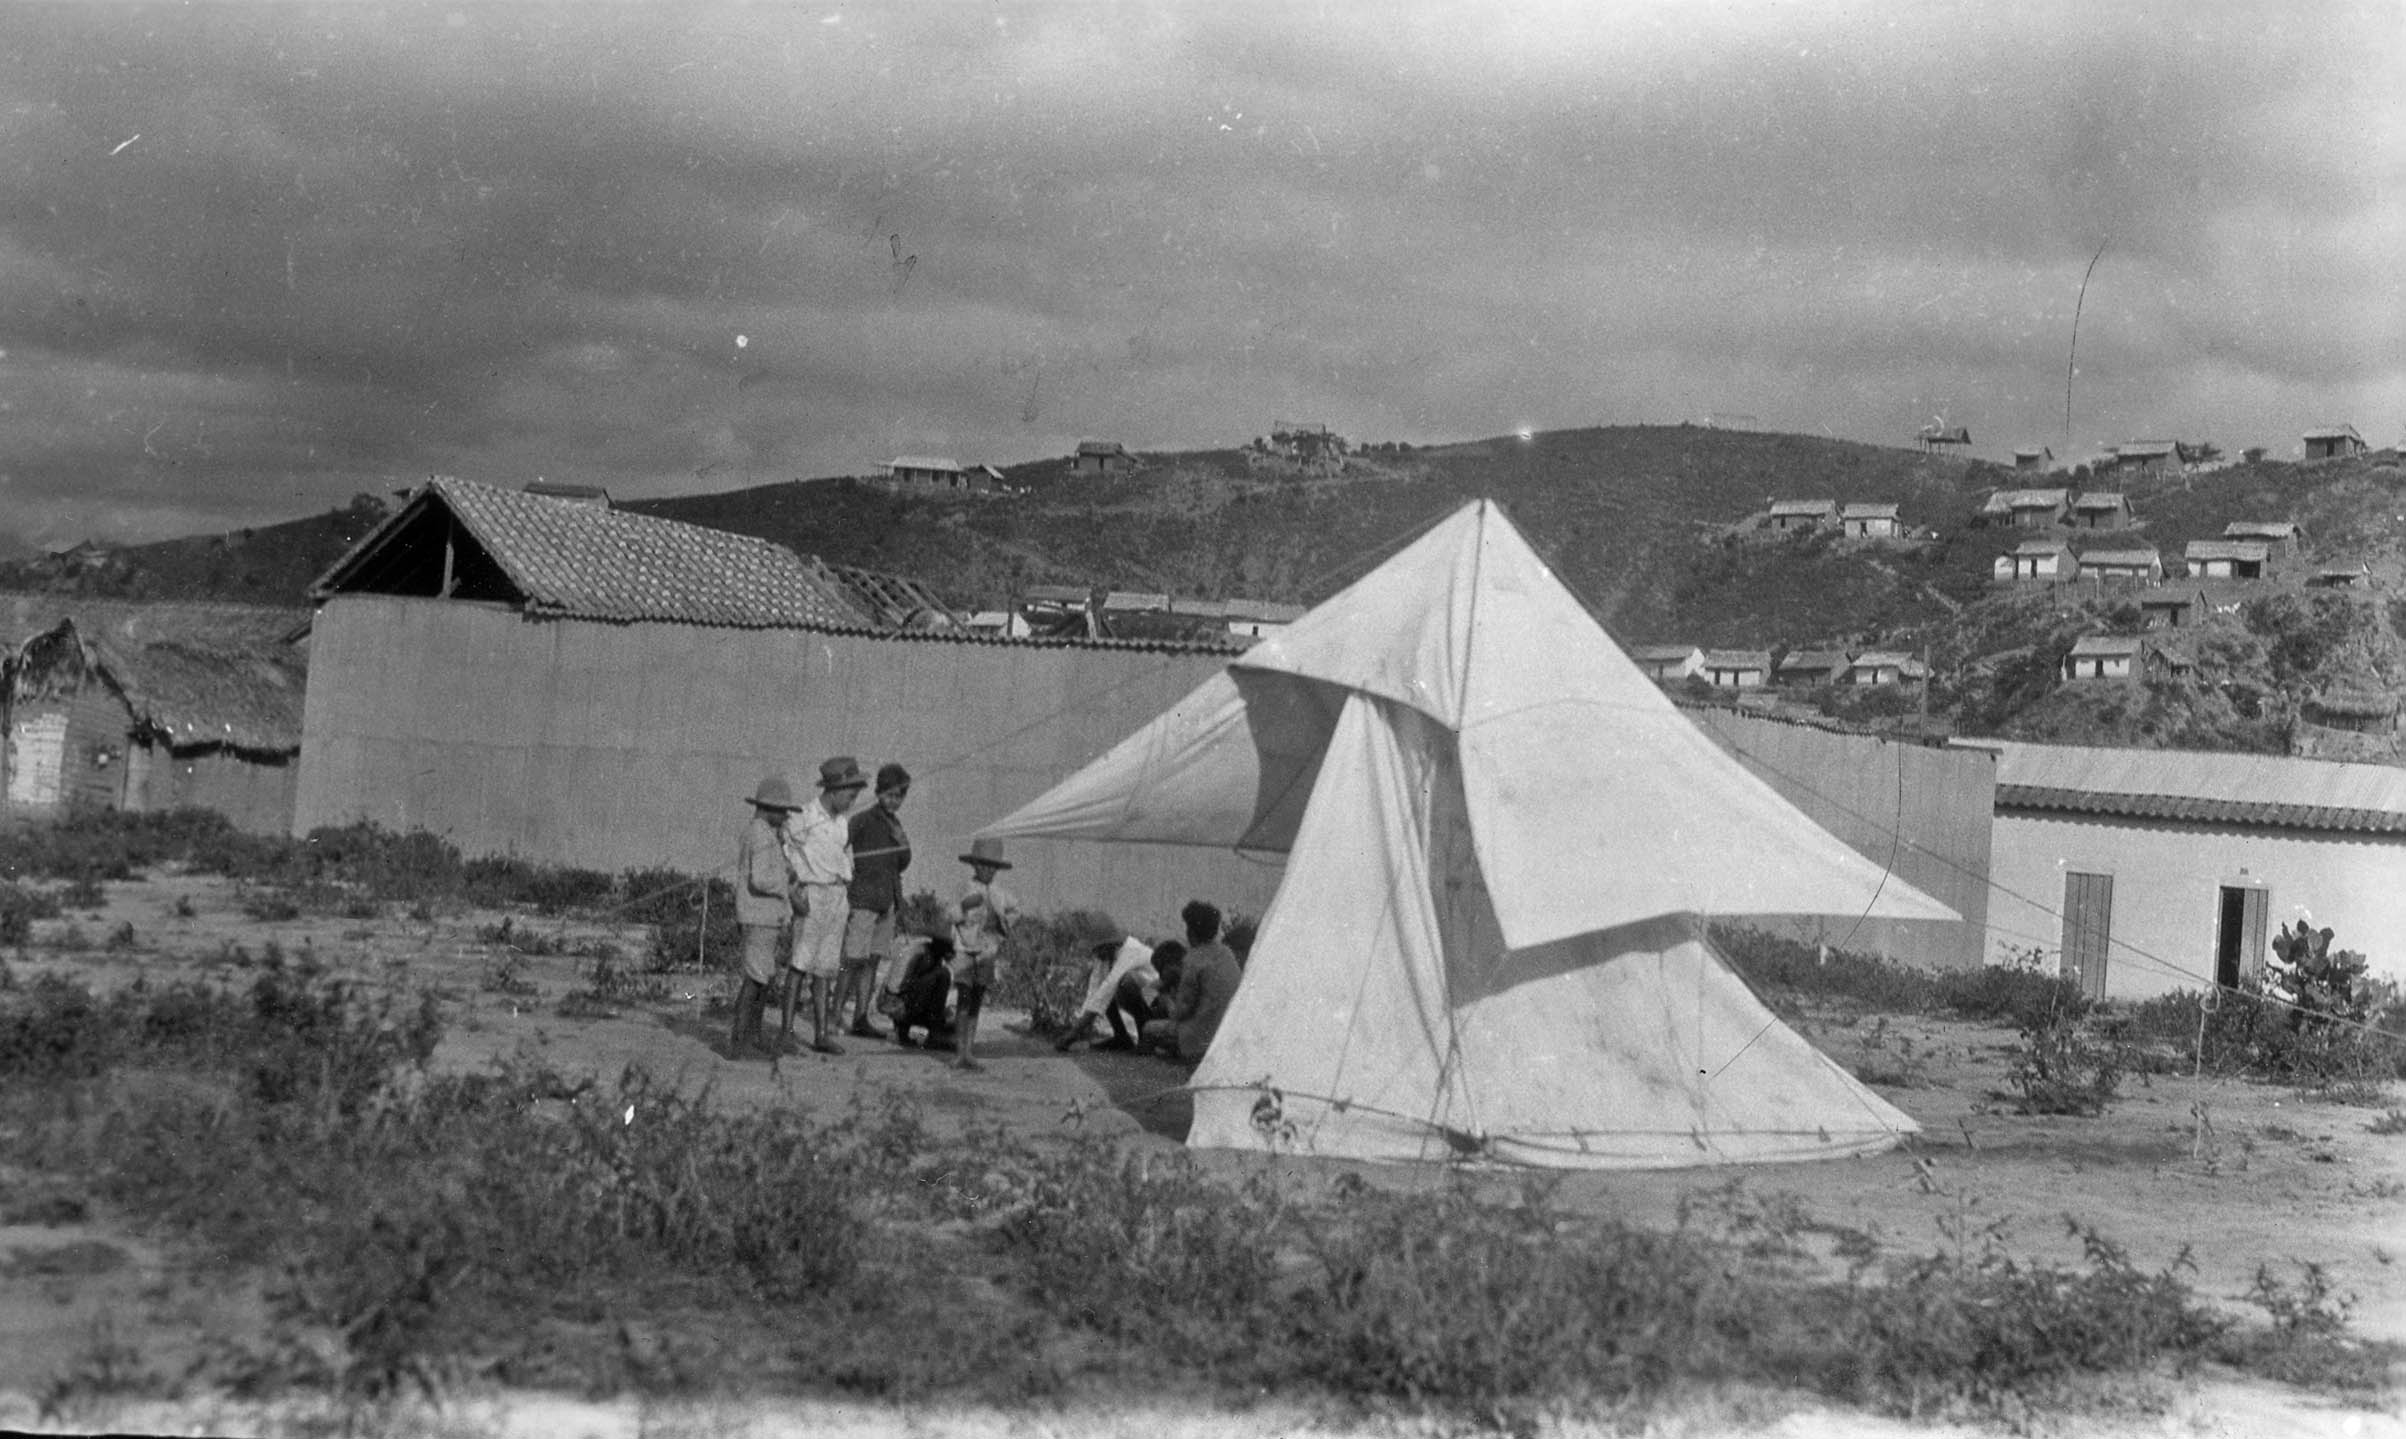 Earl Hanson's Valera magnetic station, Venezuela, 31 October 1931. Note the canvas tent that was used to protect the instrument whilst observations were being made. Image: Carnegie Institution of Washington, Department of Terrestrial Magnetism.